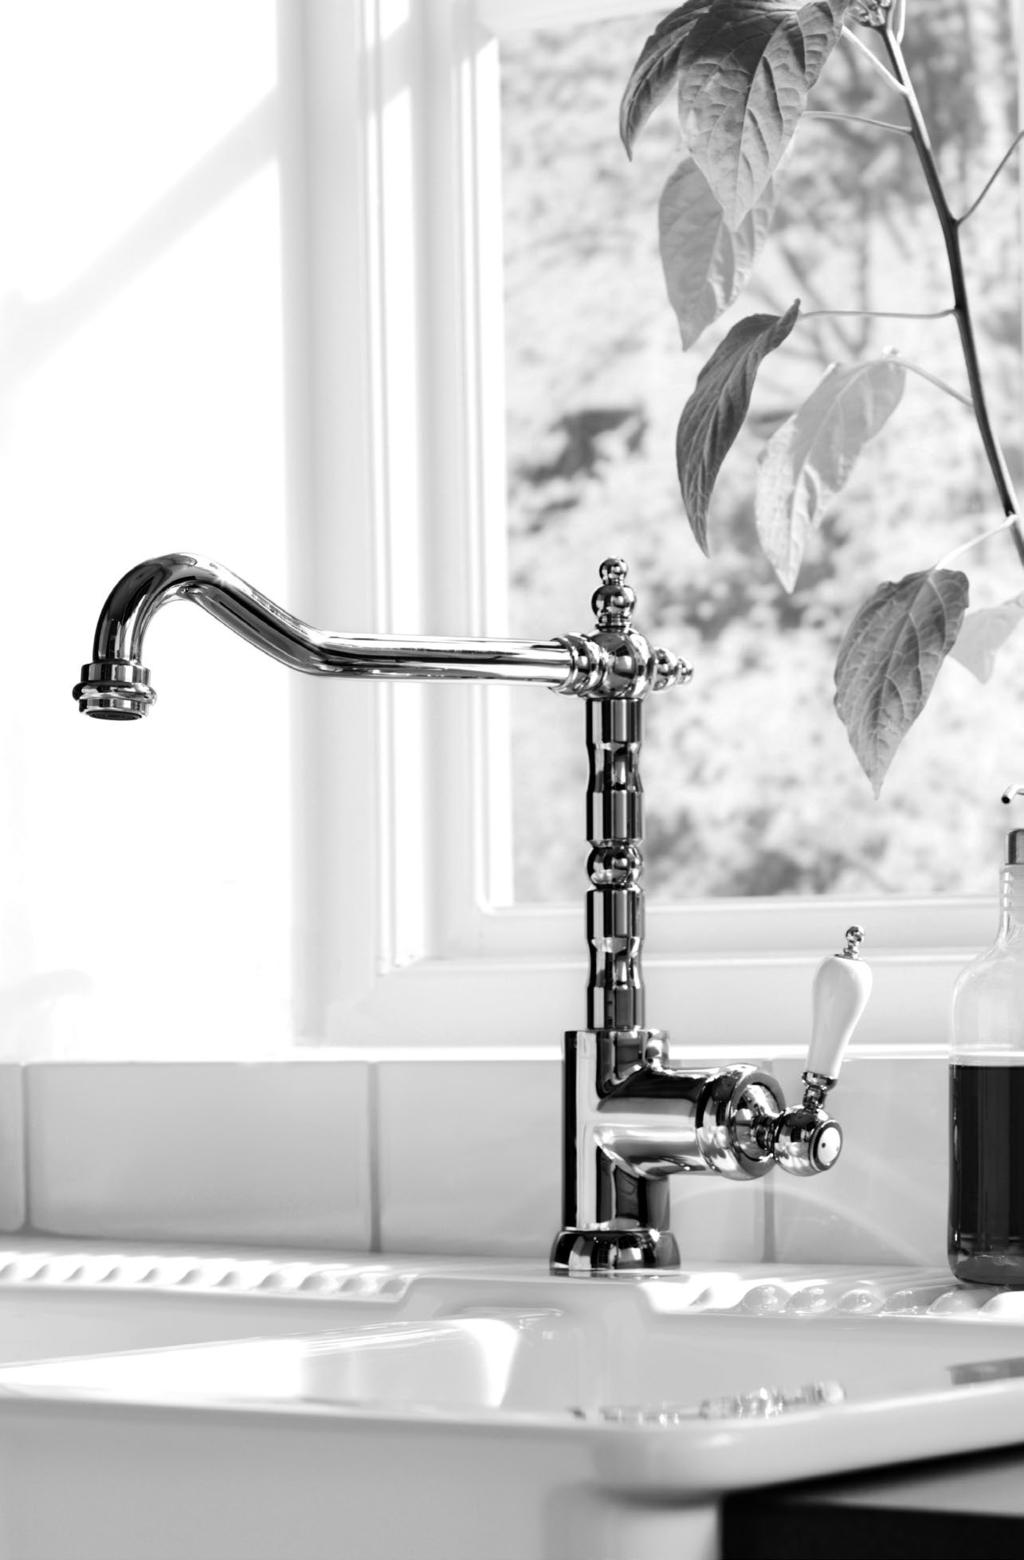 Everyday life at home puts high demands on kitchen mixer taps.